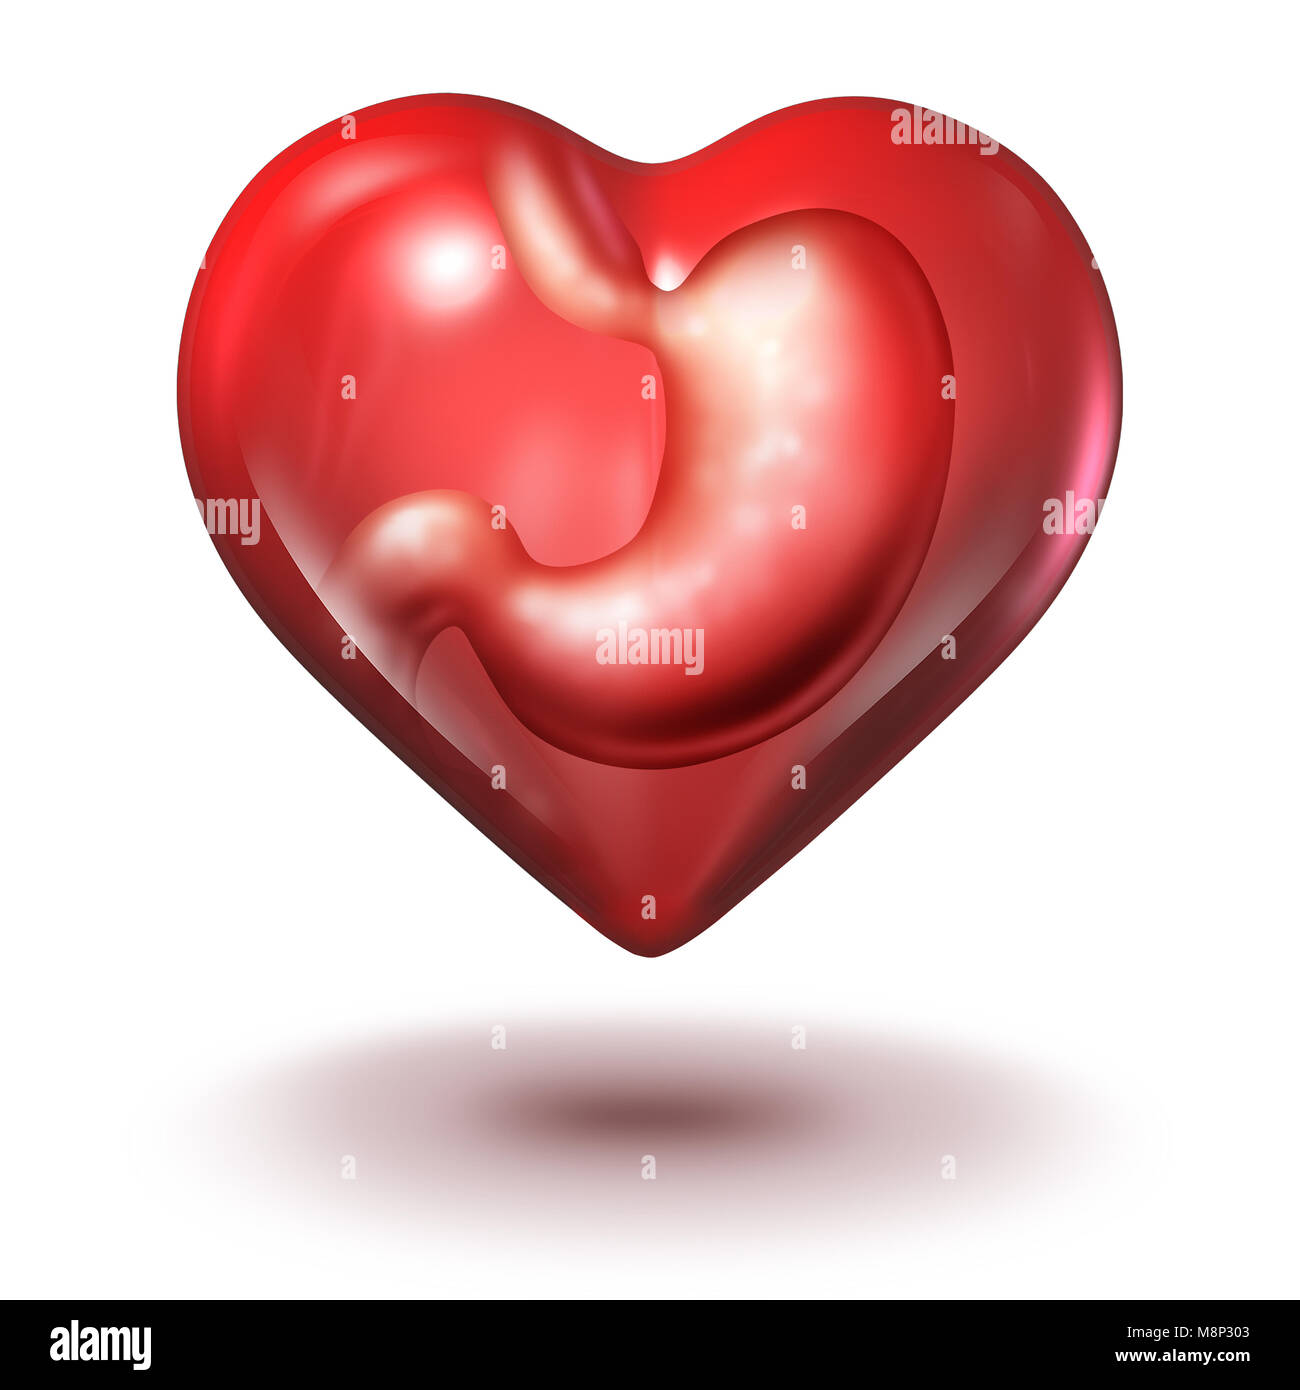 Emotional eating addiction health concept as a human stomach inside a heart shape as a foodie or food lover symbol as a 3D illustration. Stock Photo